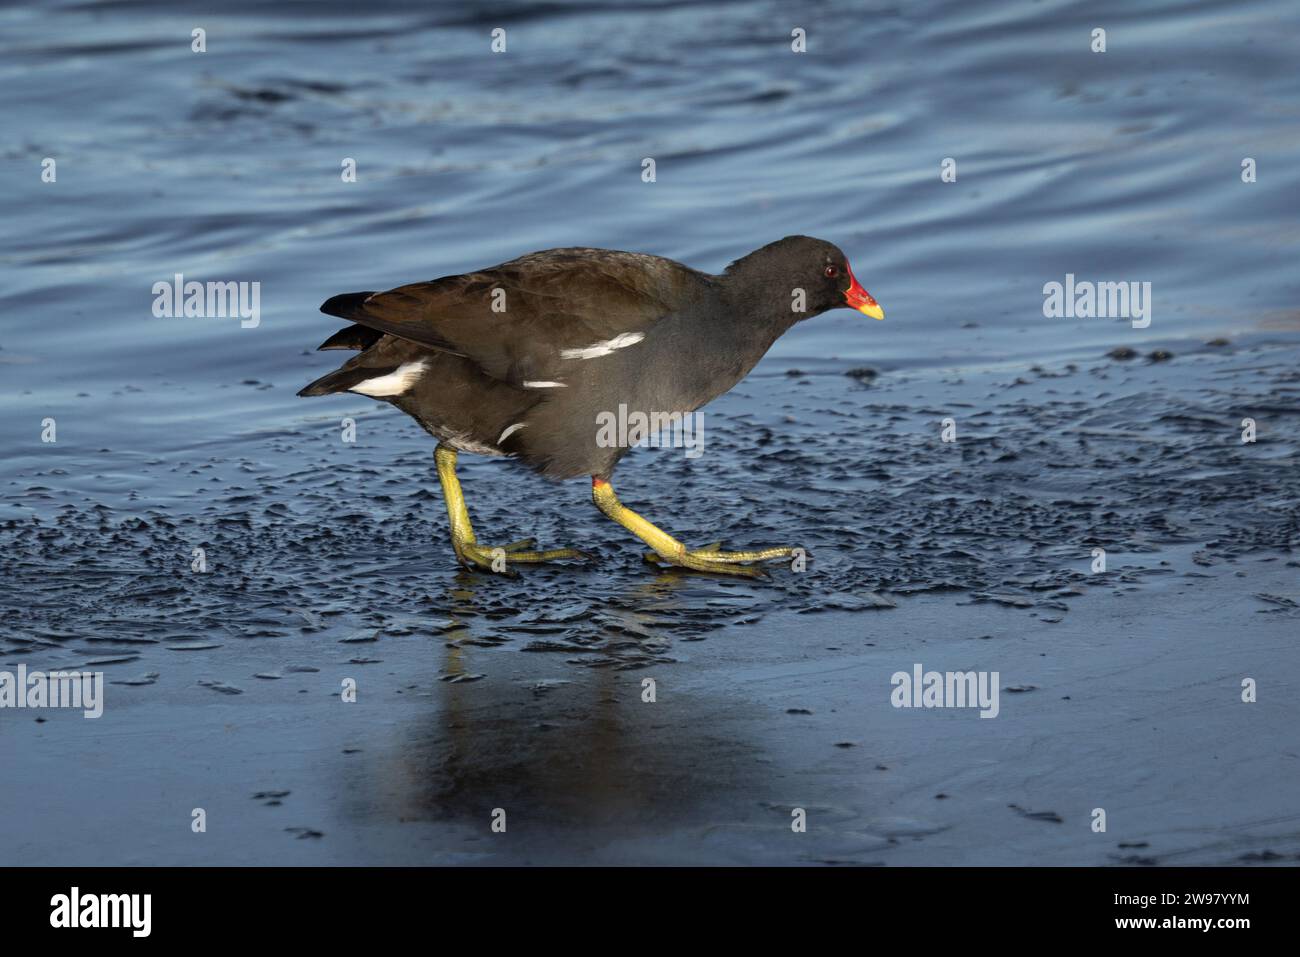 a close up of a moorhen as it walks on the ice. It shows its large feet and there is ample room for text around the subject Stock Photo